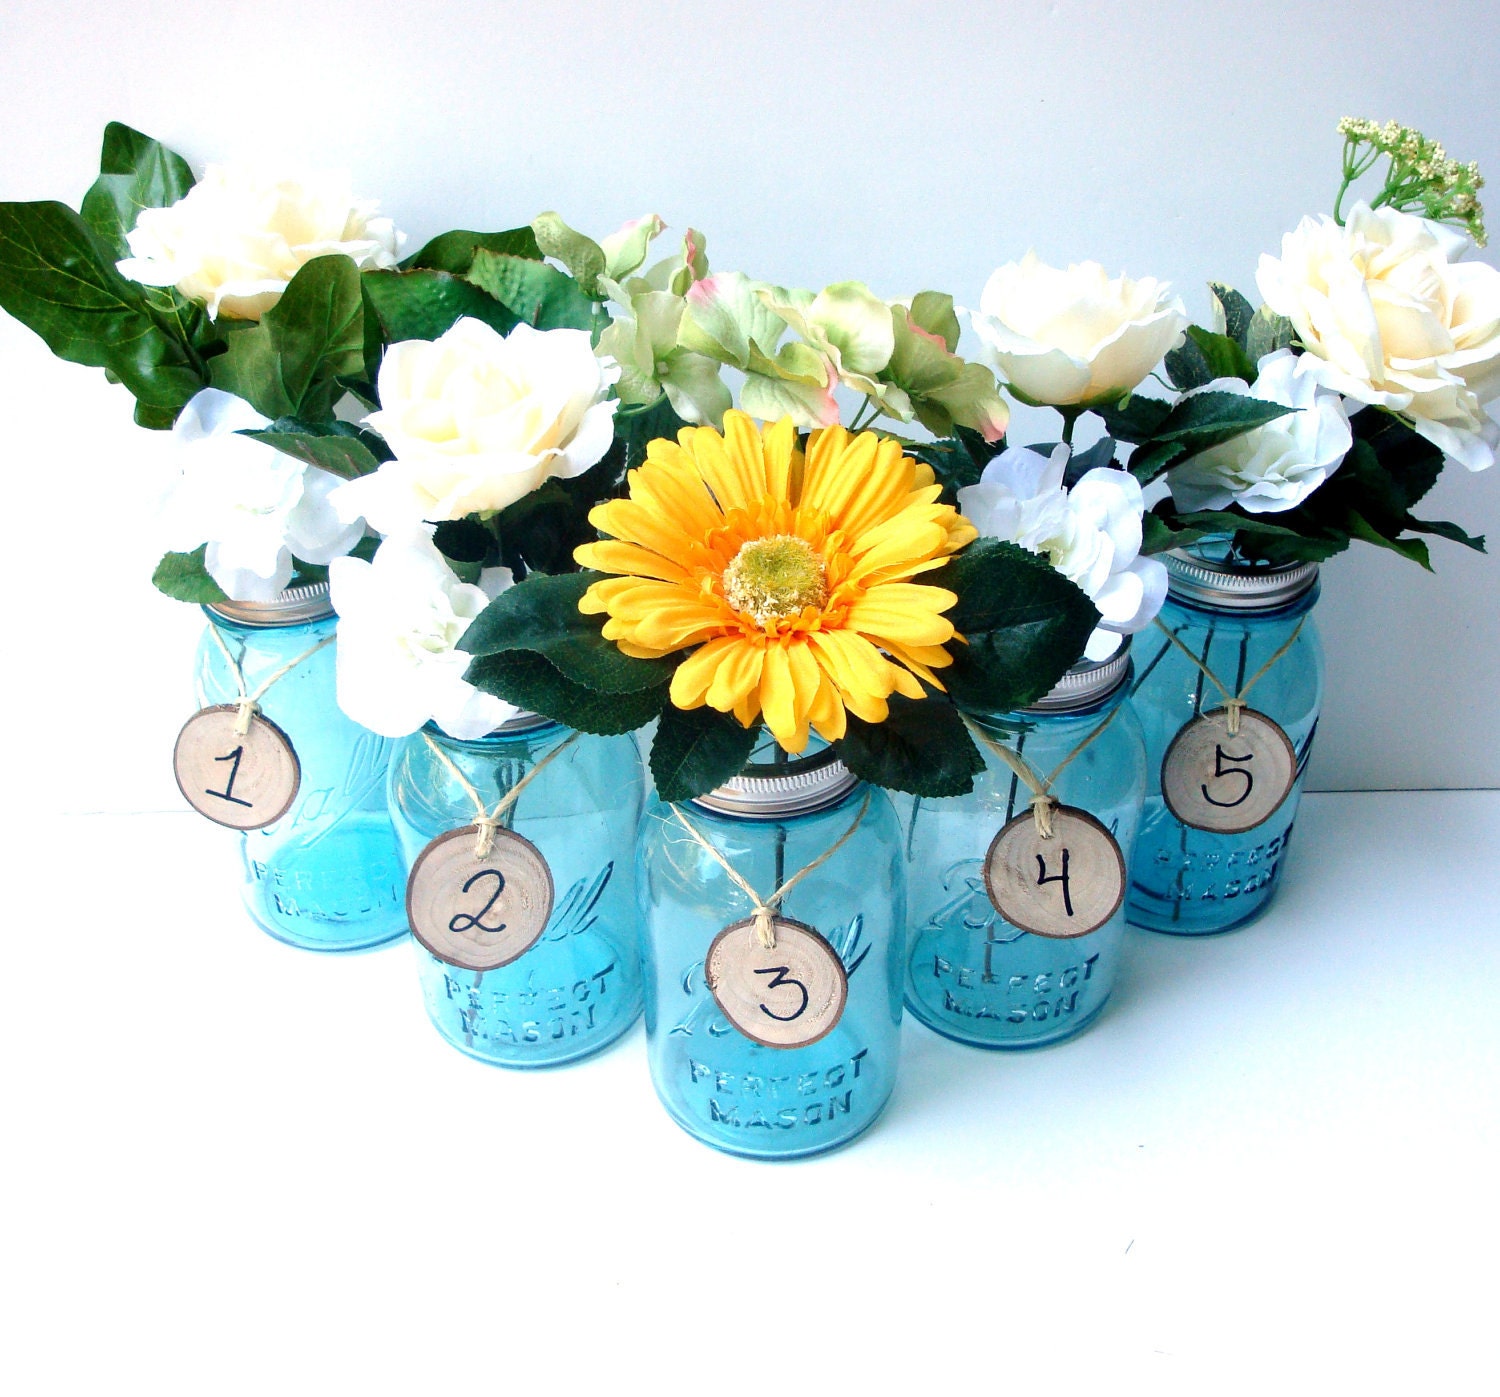 Antique Blue Mason Jar Vase Centerpieces Table Numbers With Flower Frog Lids - Set of 5